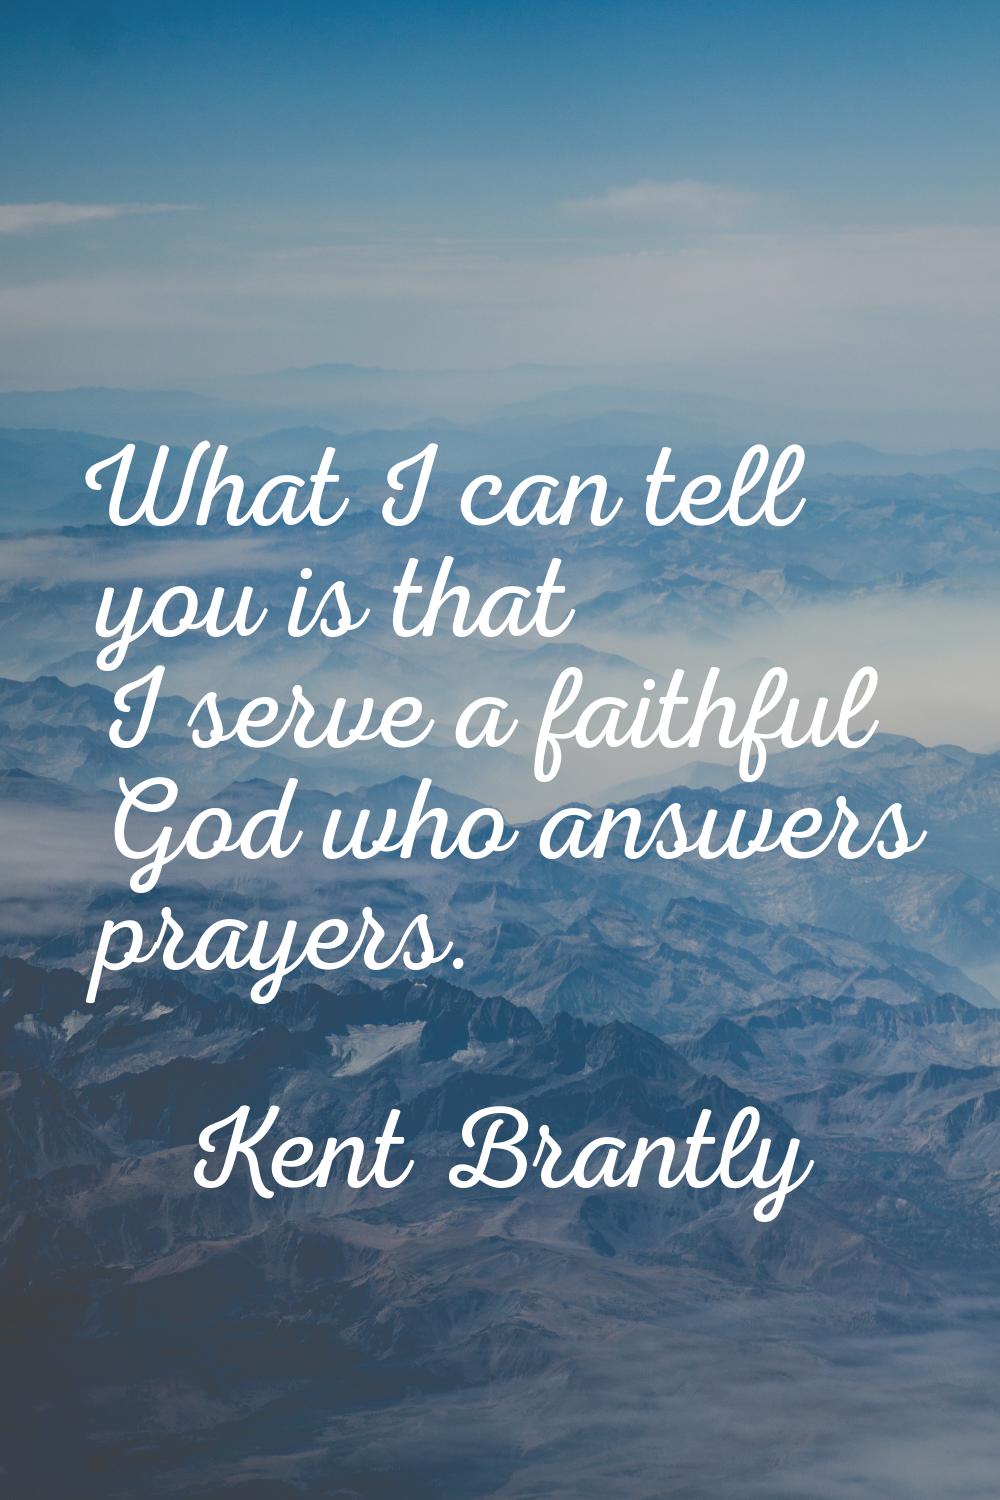 What I can tell you is that I serve a faithful God who answers prayers.